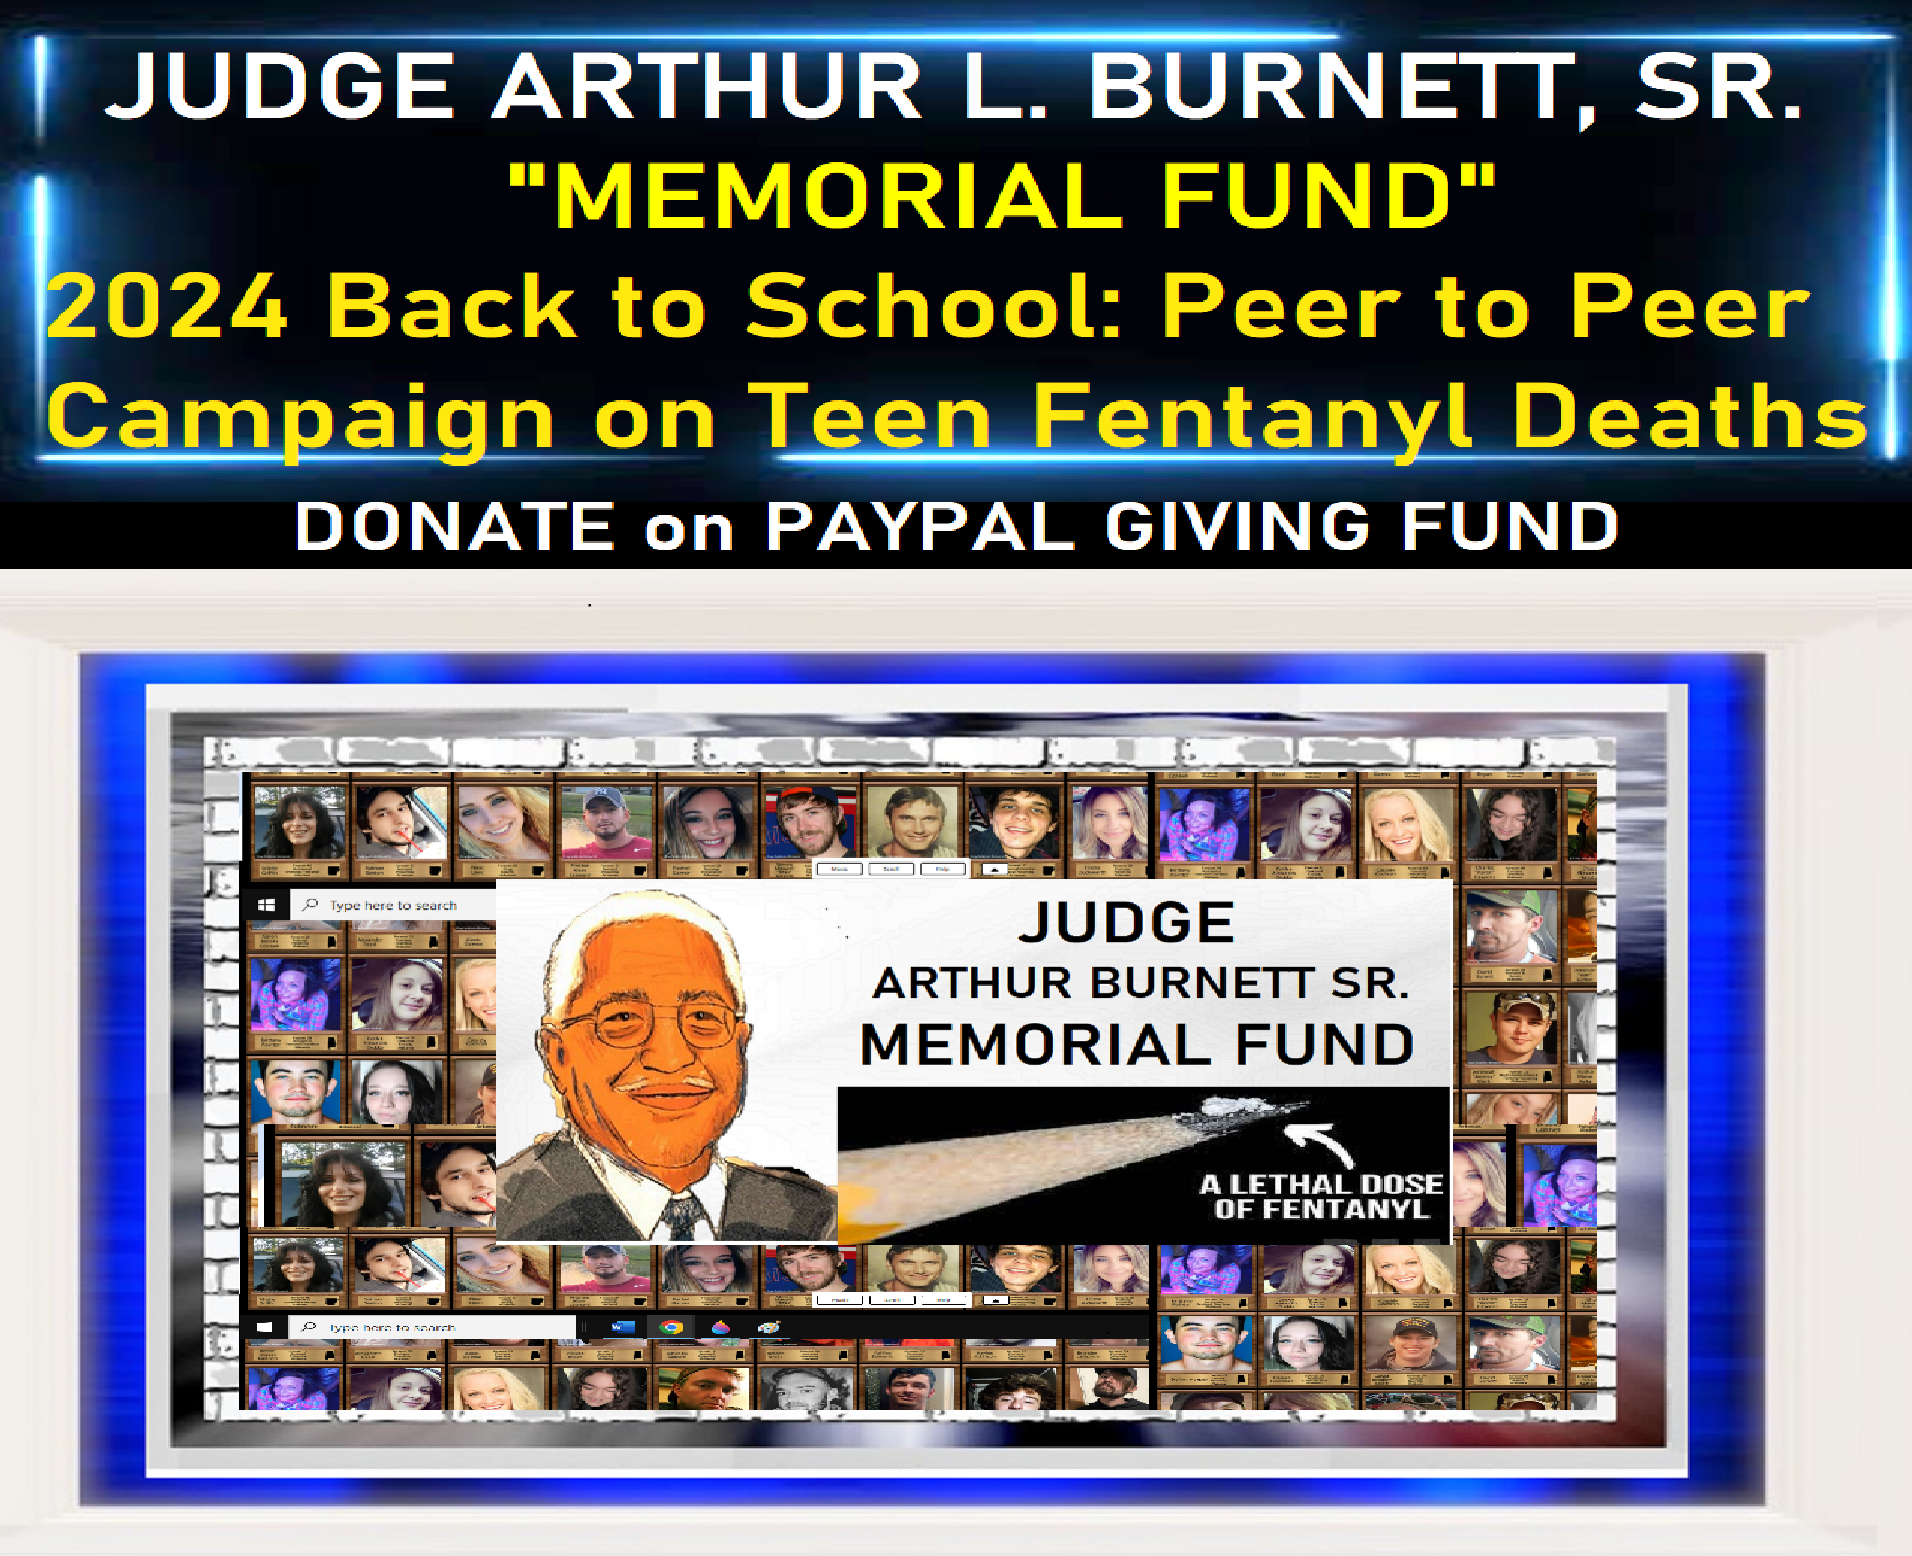 Judge Arthur L. Burnett, Sr. Global Youth Justice Inc. Co-Founder and Board VIce President